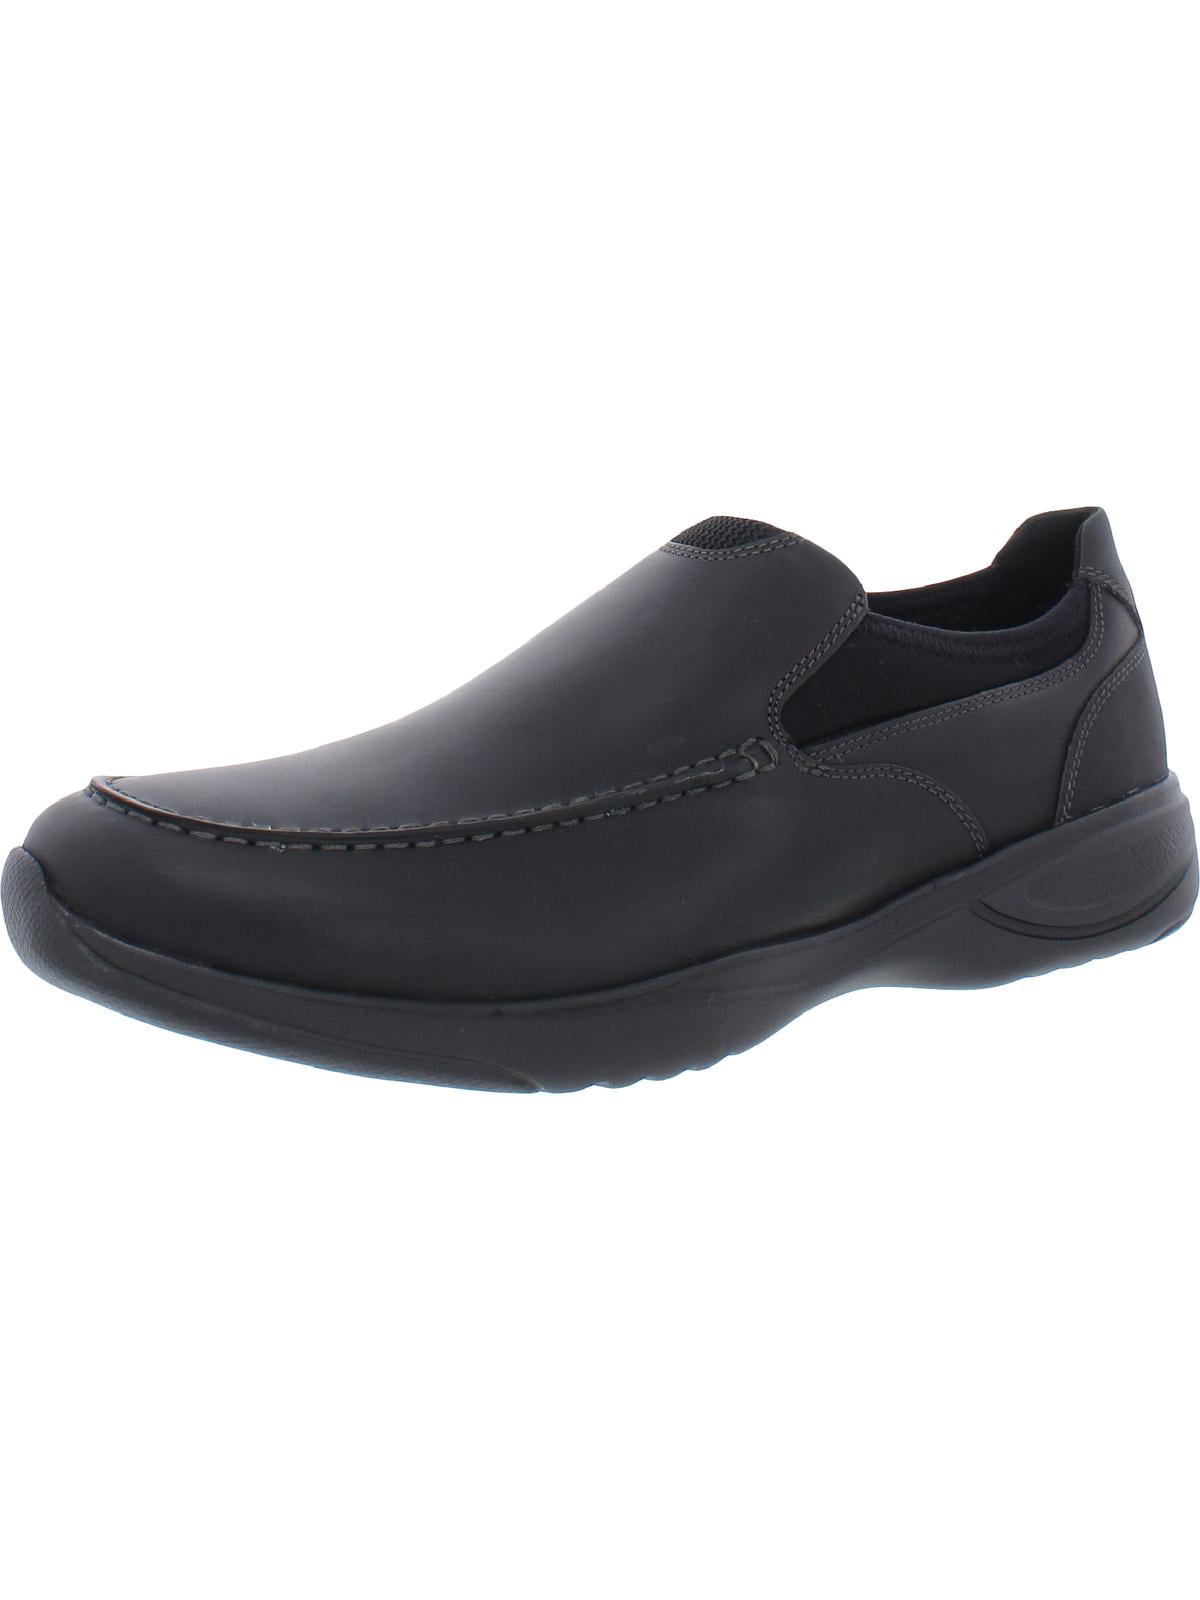 Rockport Mens Metro Path Slip On Leather Slip On Casual and Fashion ...